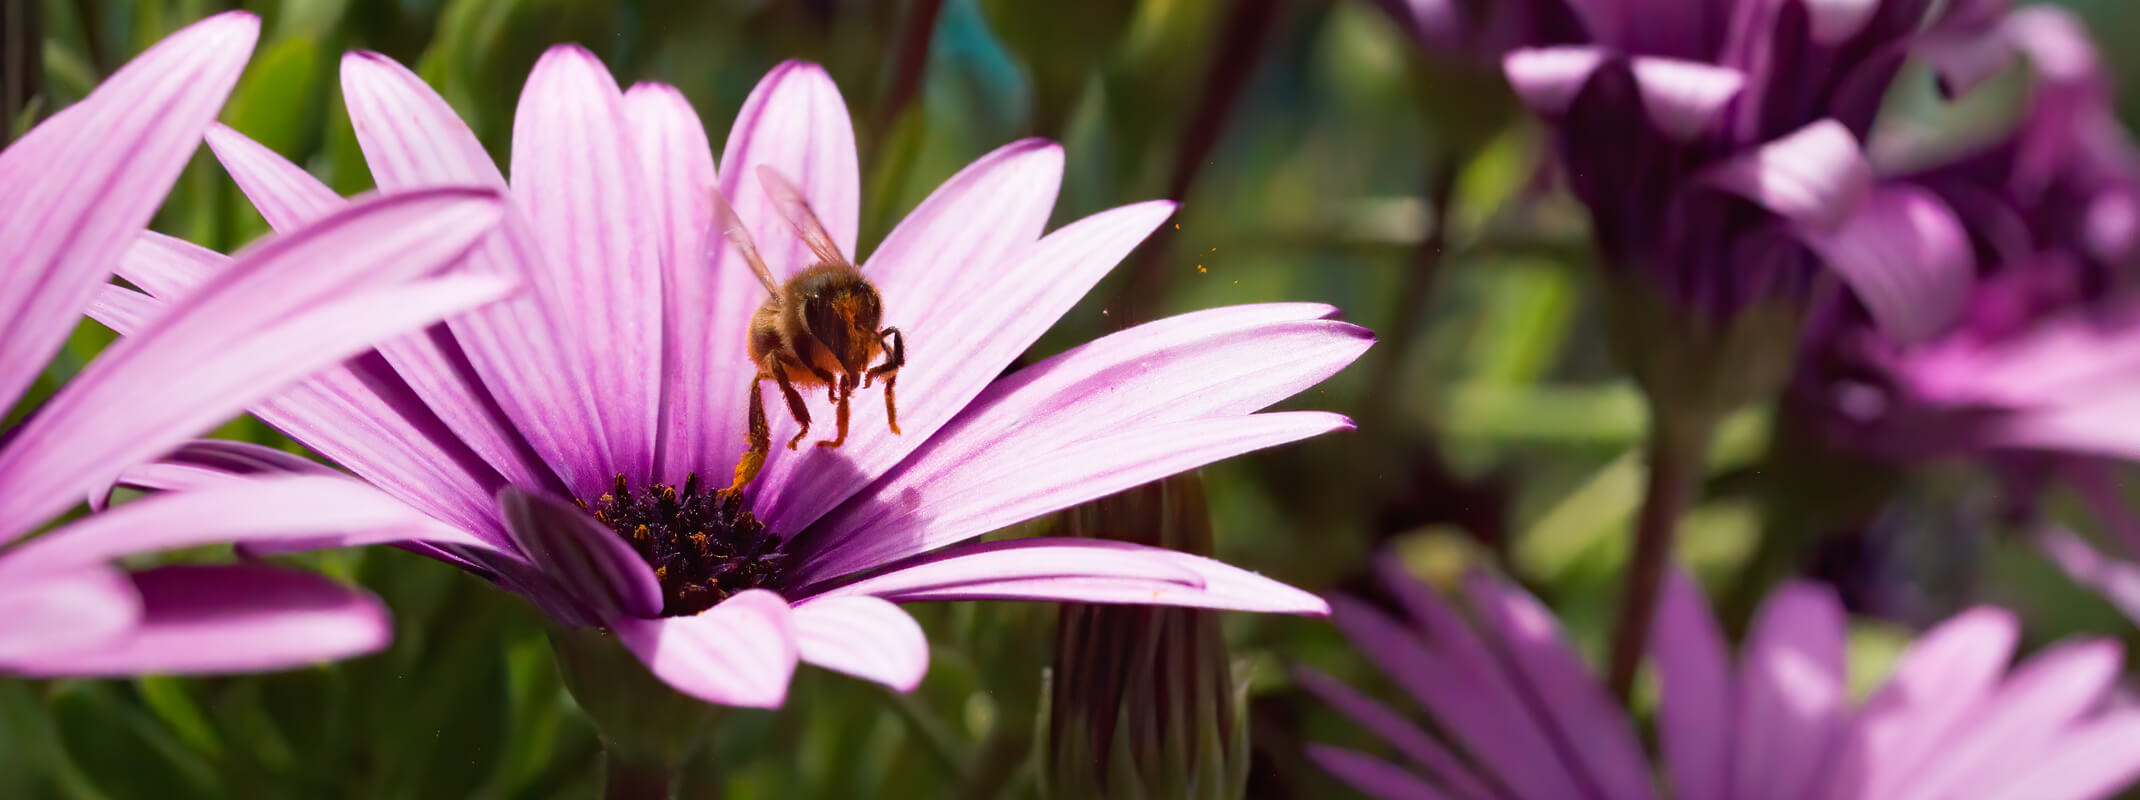 bee with pollen just flying from a purple osteospermum flower in the midst of other purple osteospermum flowers